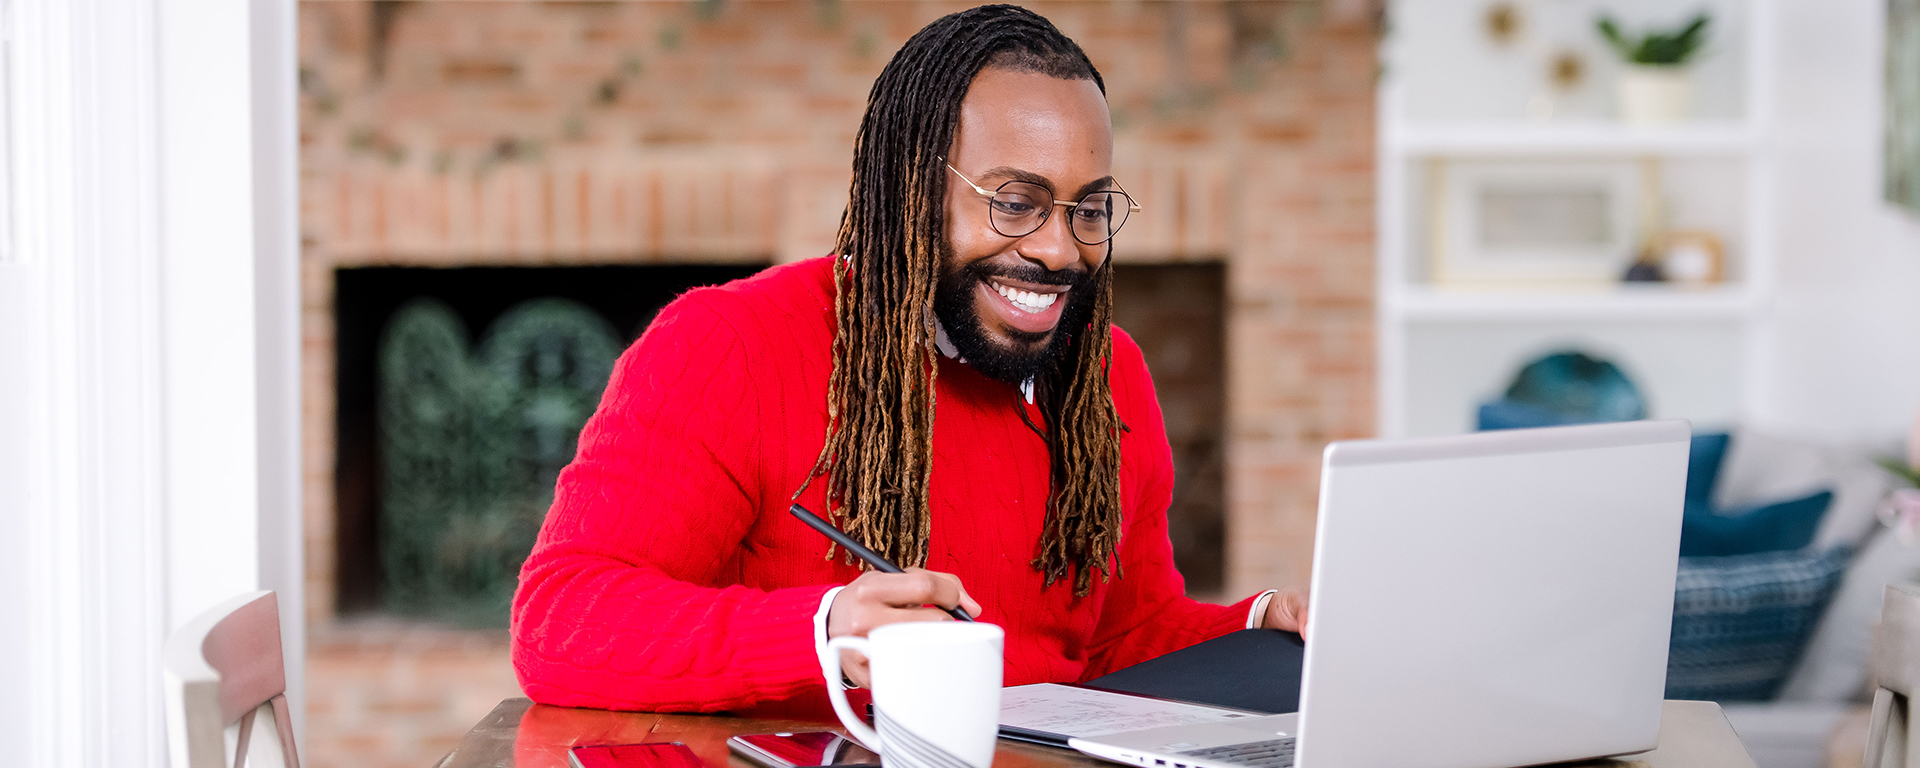 Capital One associate sits in his house in a red sweater on his laptop while working from home